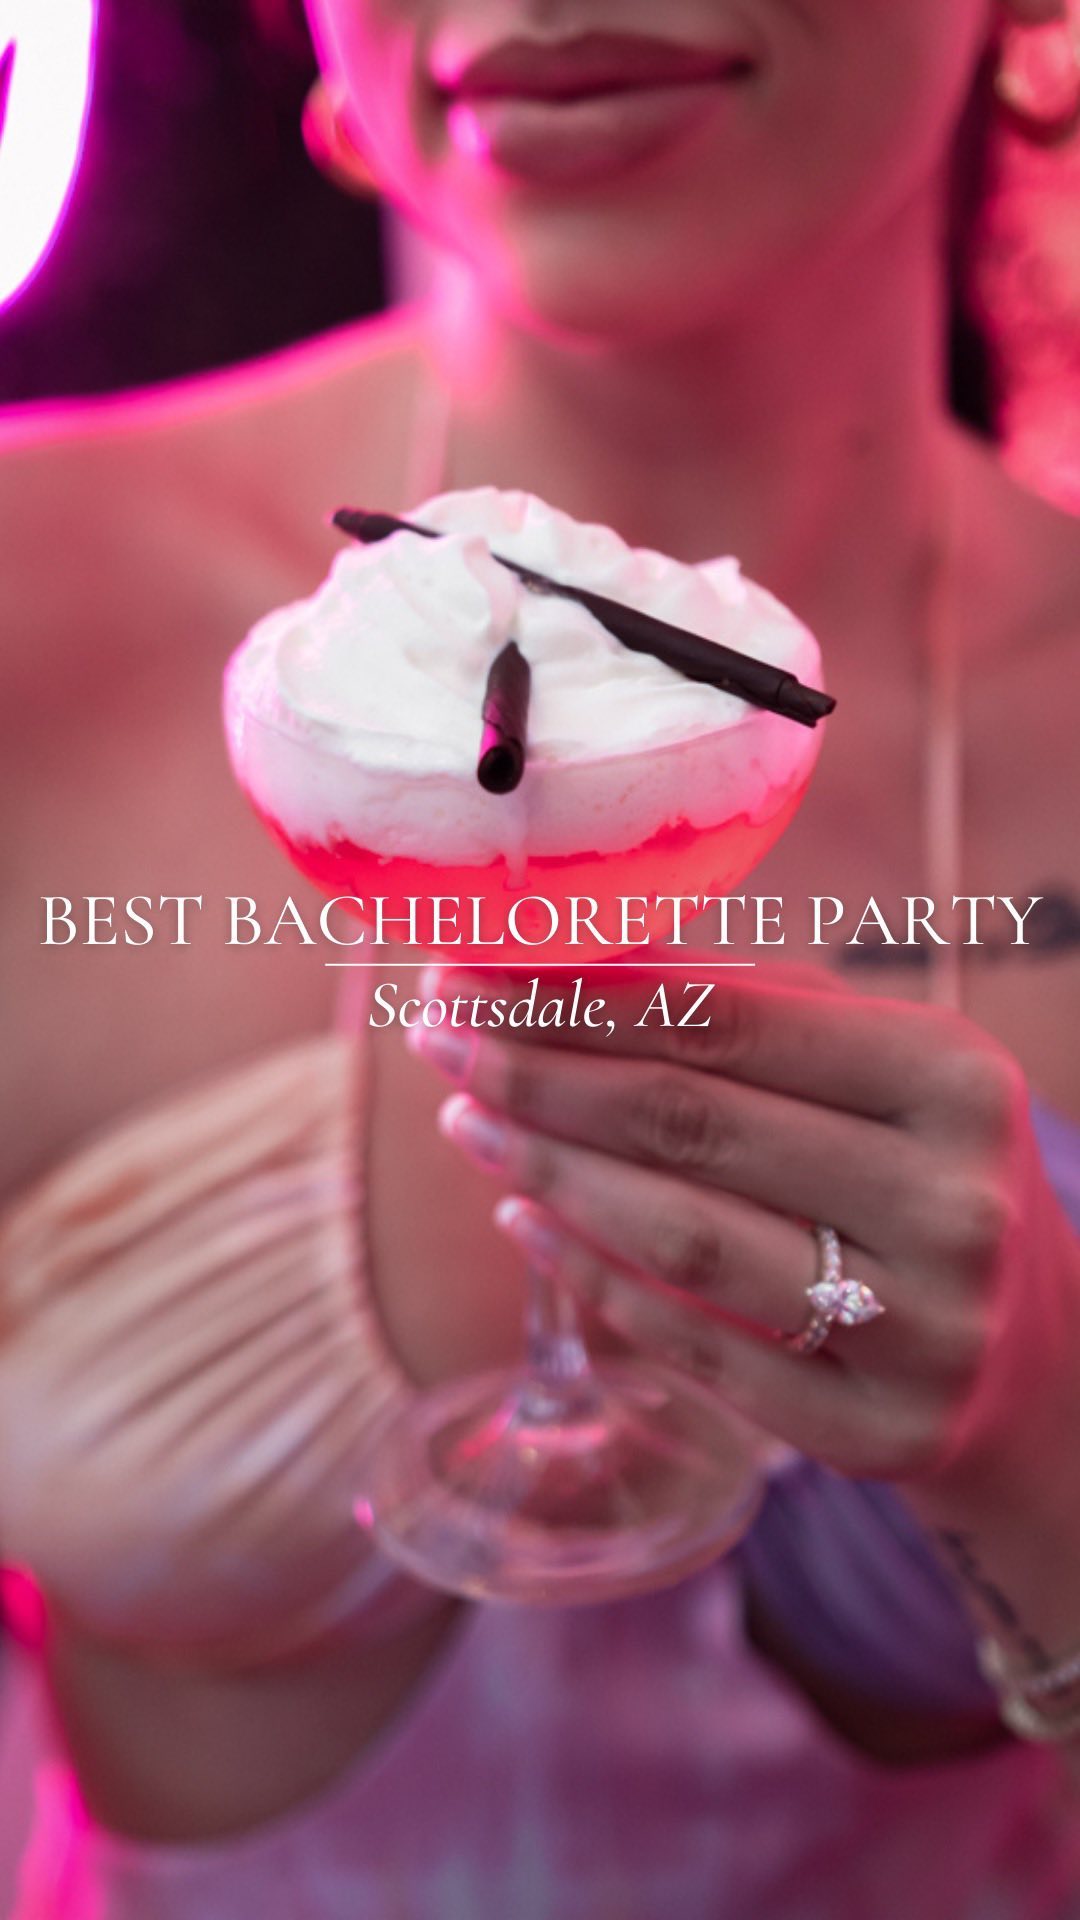 As the ultimate place to celebrate a Scottsdale bachelorette party, @cakescottsdale goes beyond just fab drinks and a high-energy setting (though it has that, too). The Old Town hotspot is frosted with pinks, feathers, flowers and plenty of shine and sparkle, making your fete super fashion-forward and photogenic. (Your Instagram will thank you.) Read more about why Cake Scottsdale is the perfect place for your bachelorette party at FabulousArizona.com or click the link in our bio.